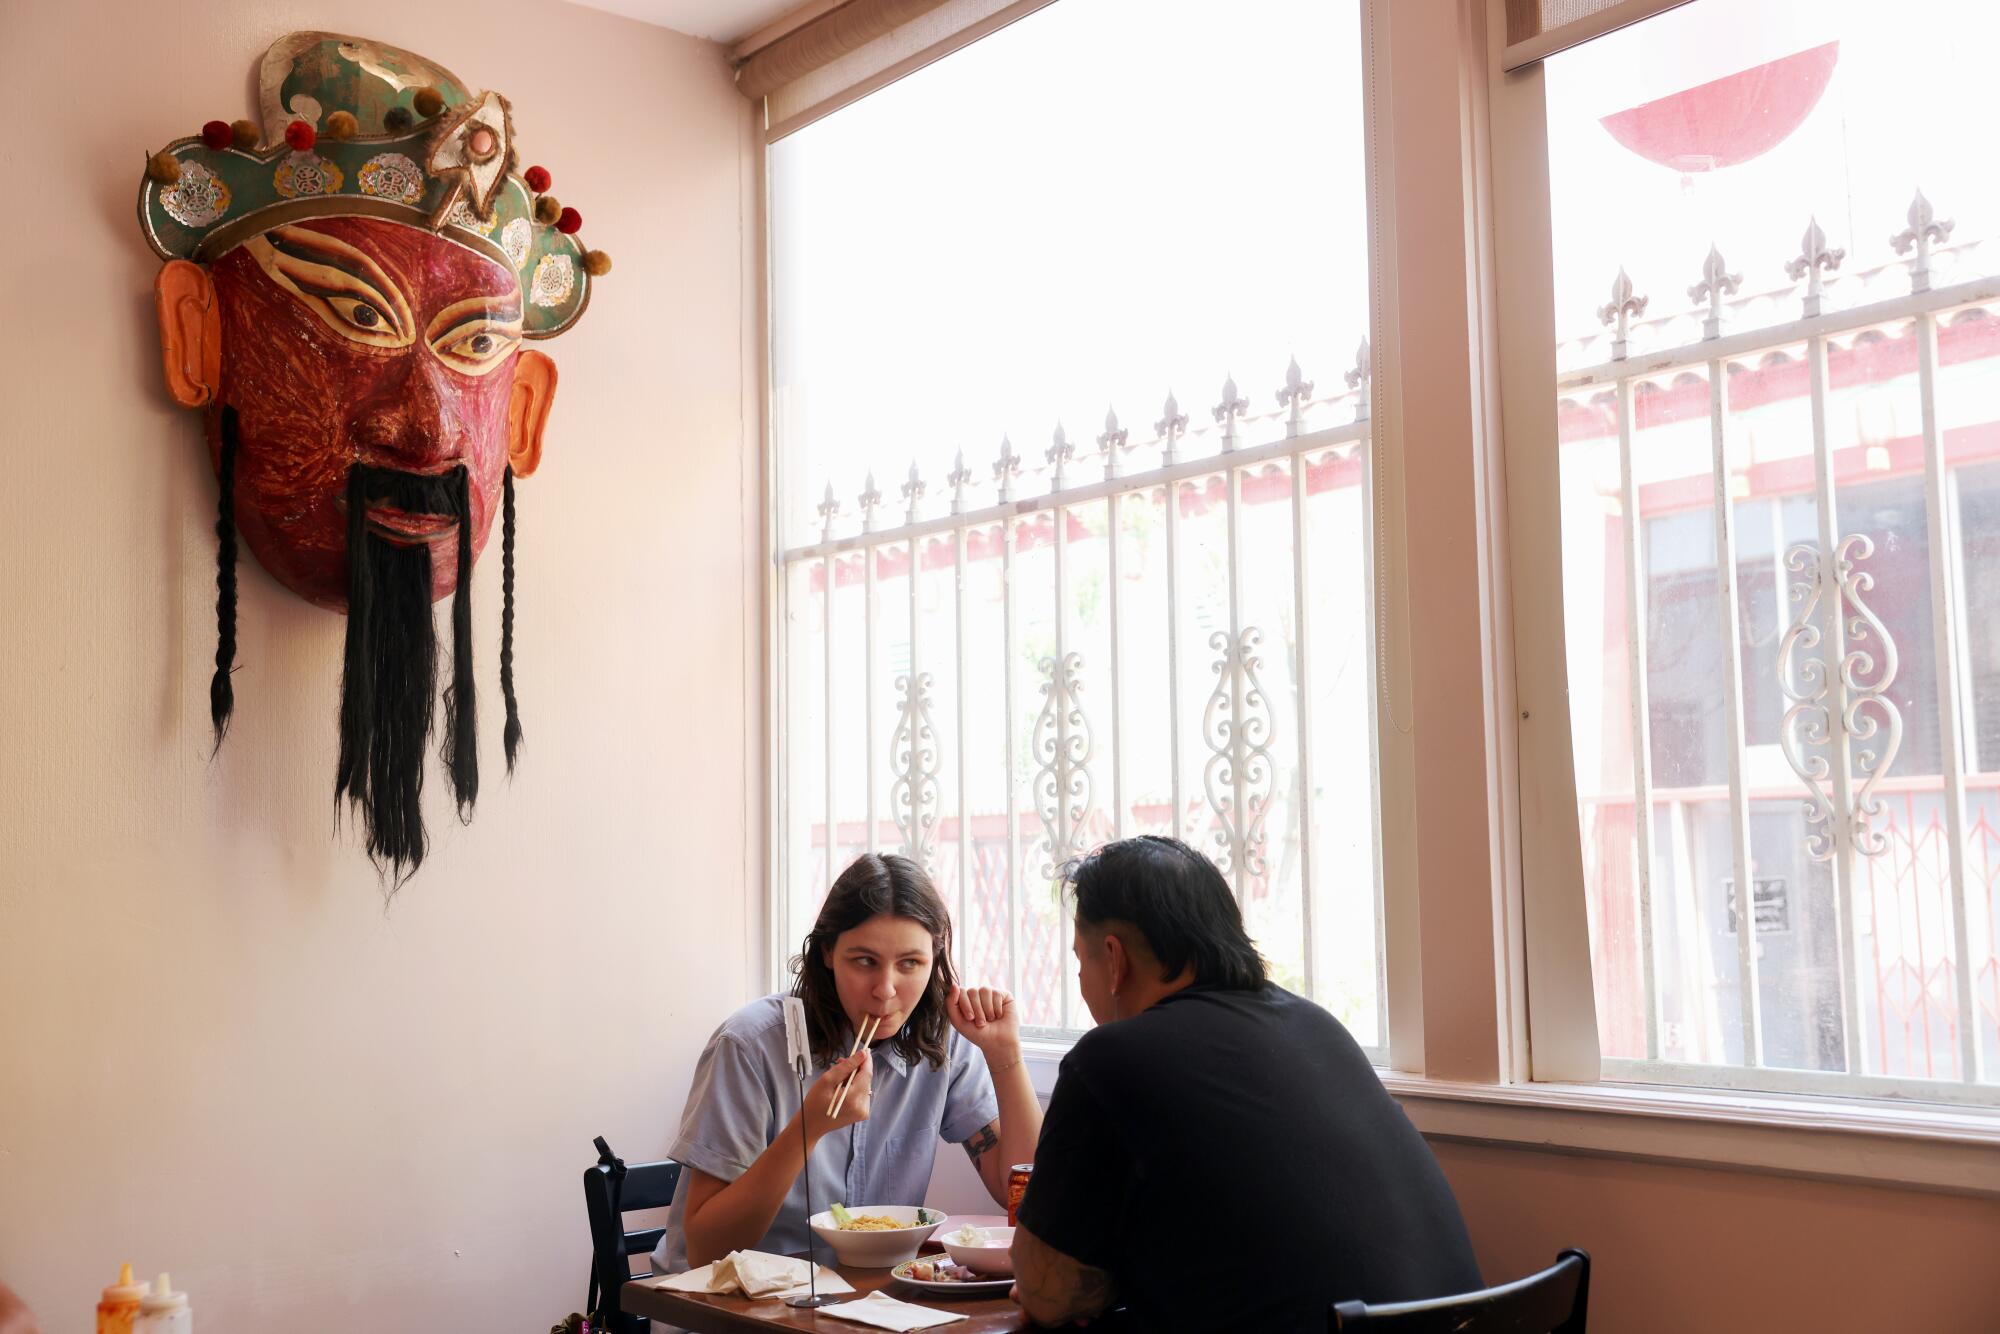 Two people dine in a restaurant next to a window, with a large mask hanging on the wall above them.